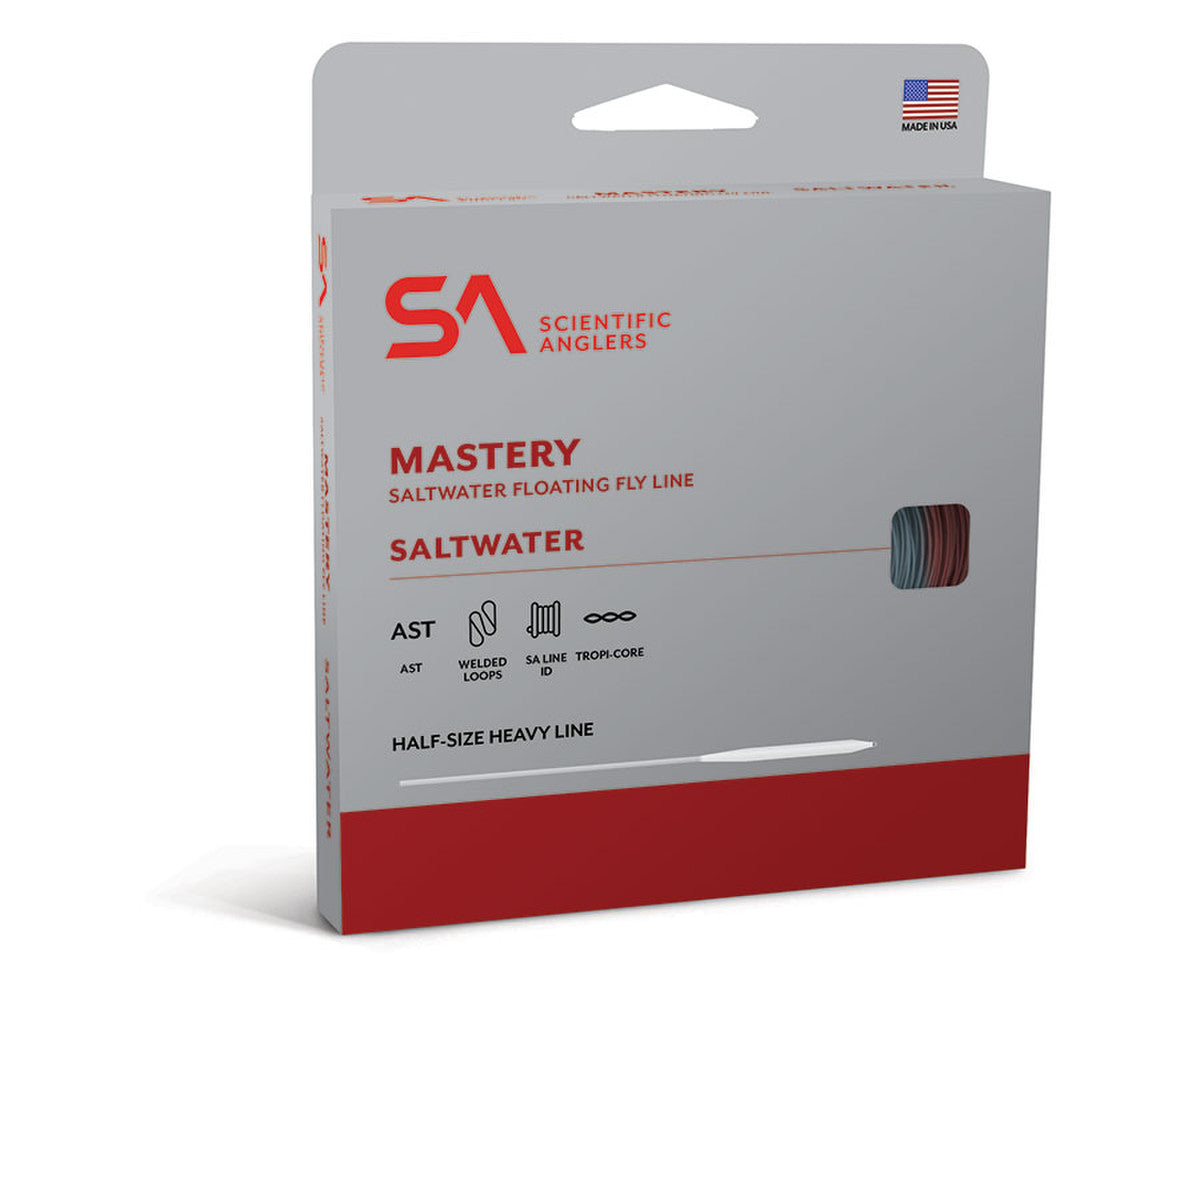 Scientific Anglers - Mastery Saltwater